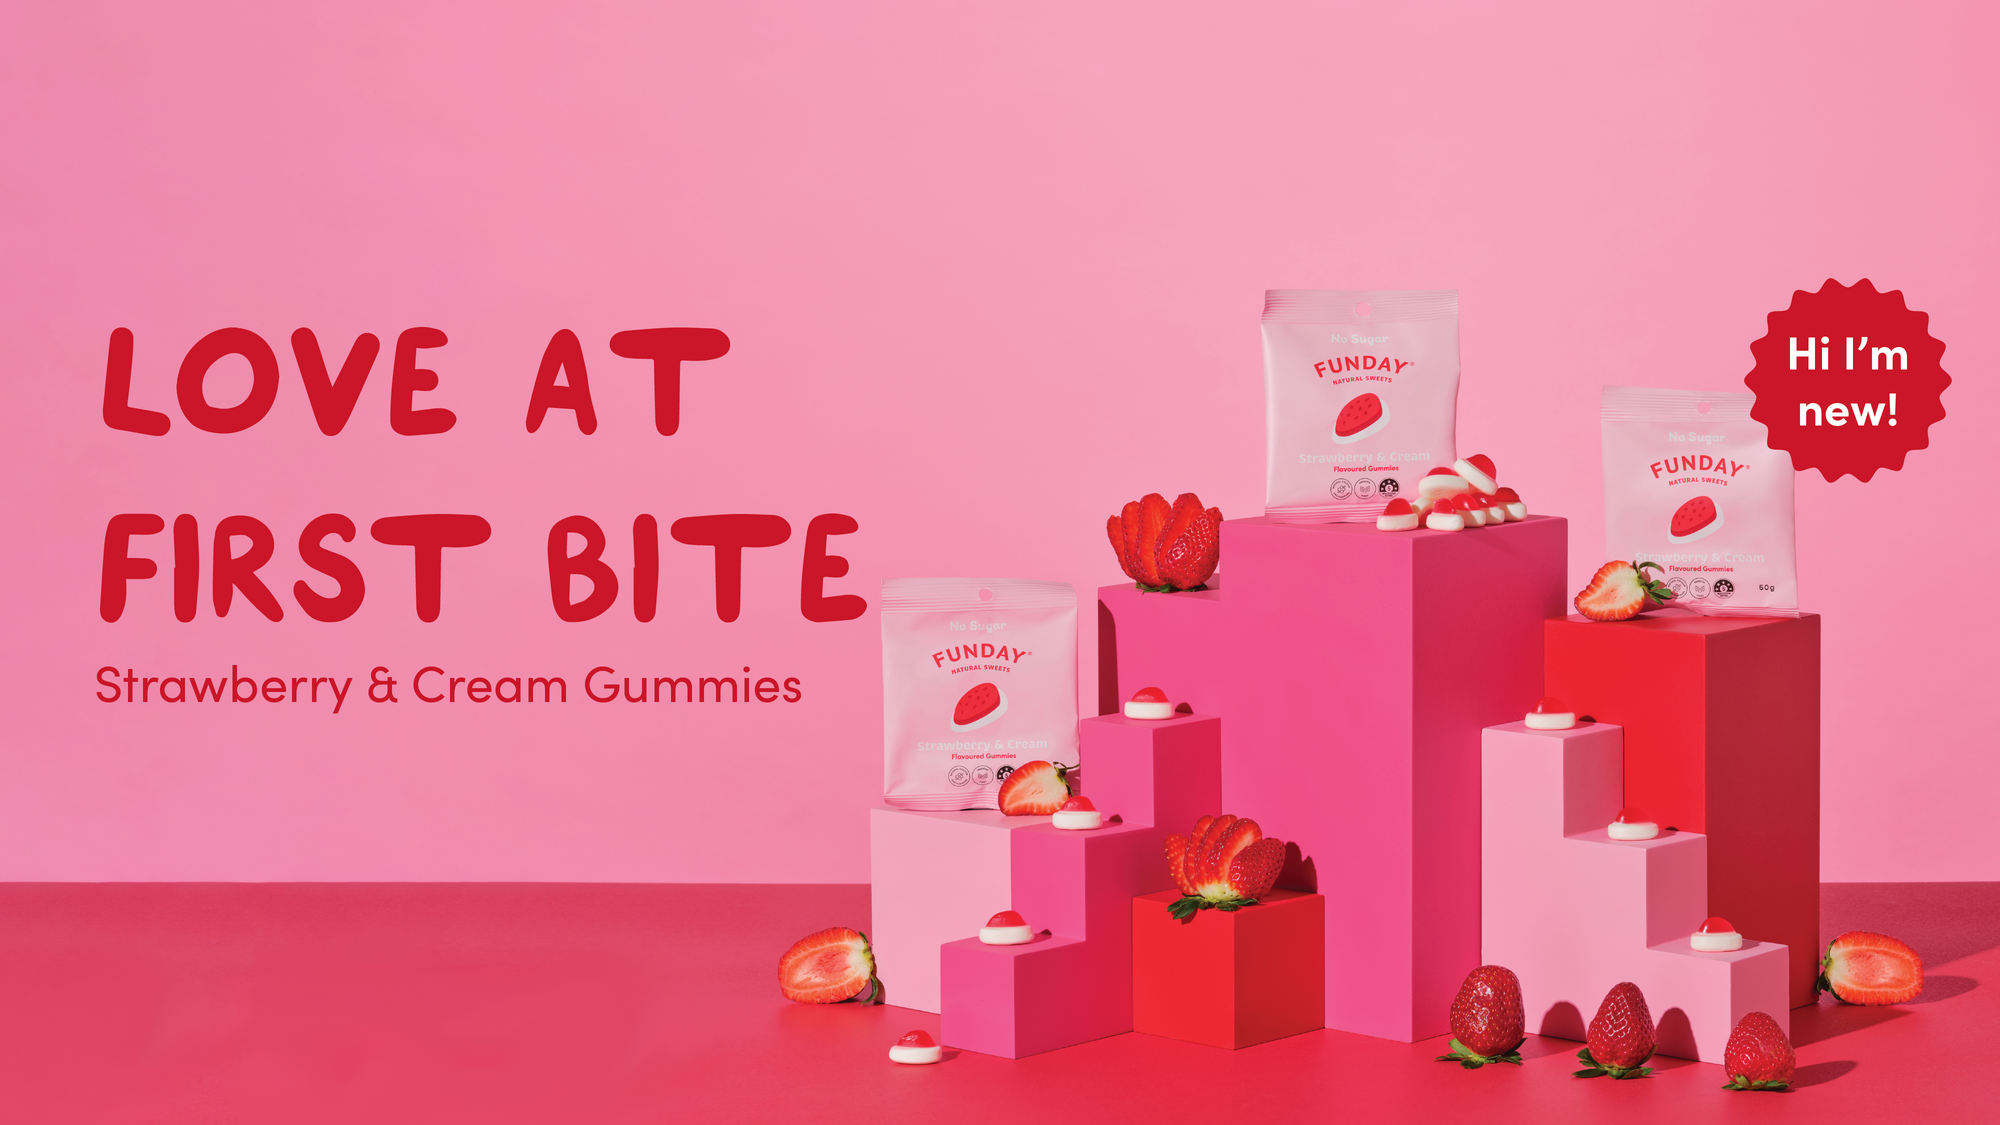 Say Hello to Our Newest Treat: Strawberry & Cream Gummies!